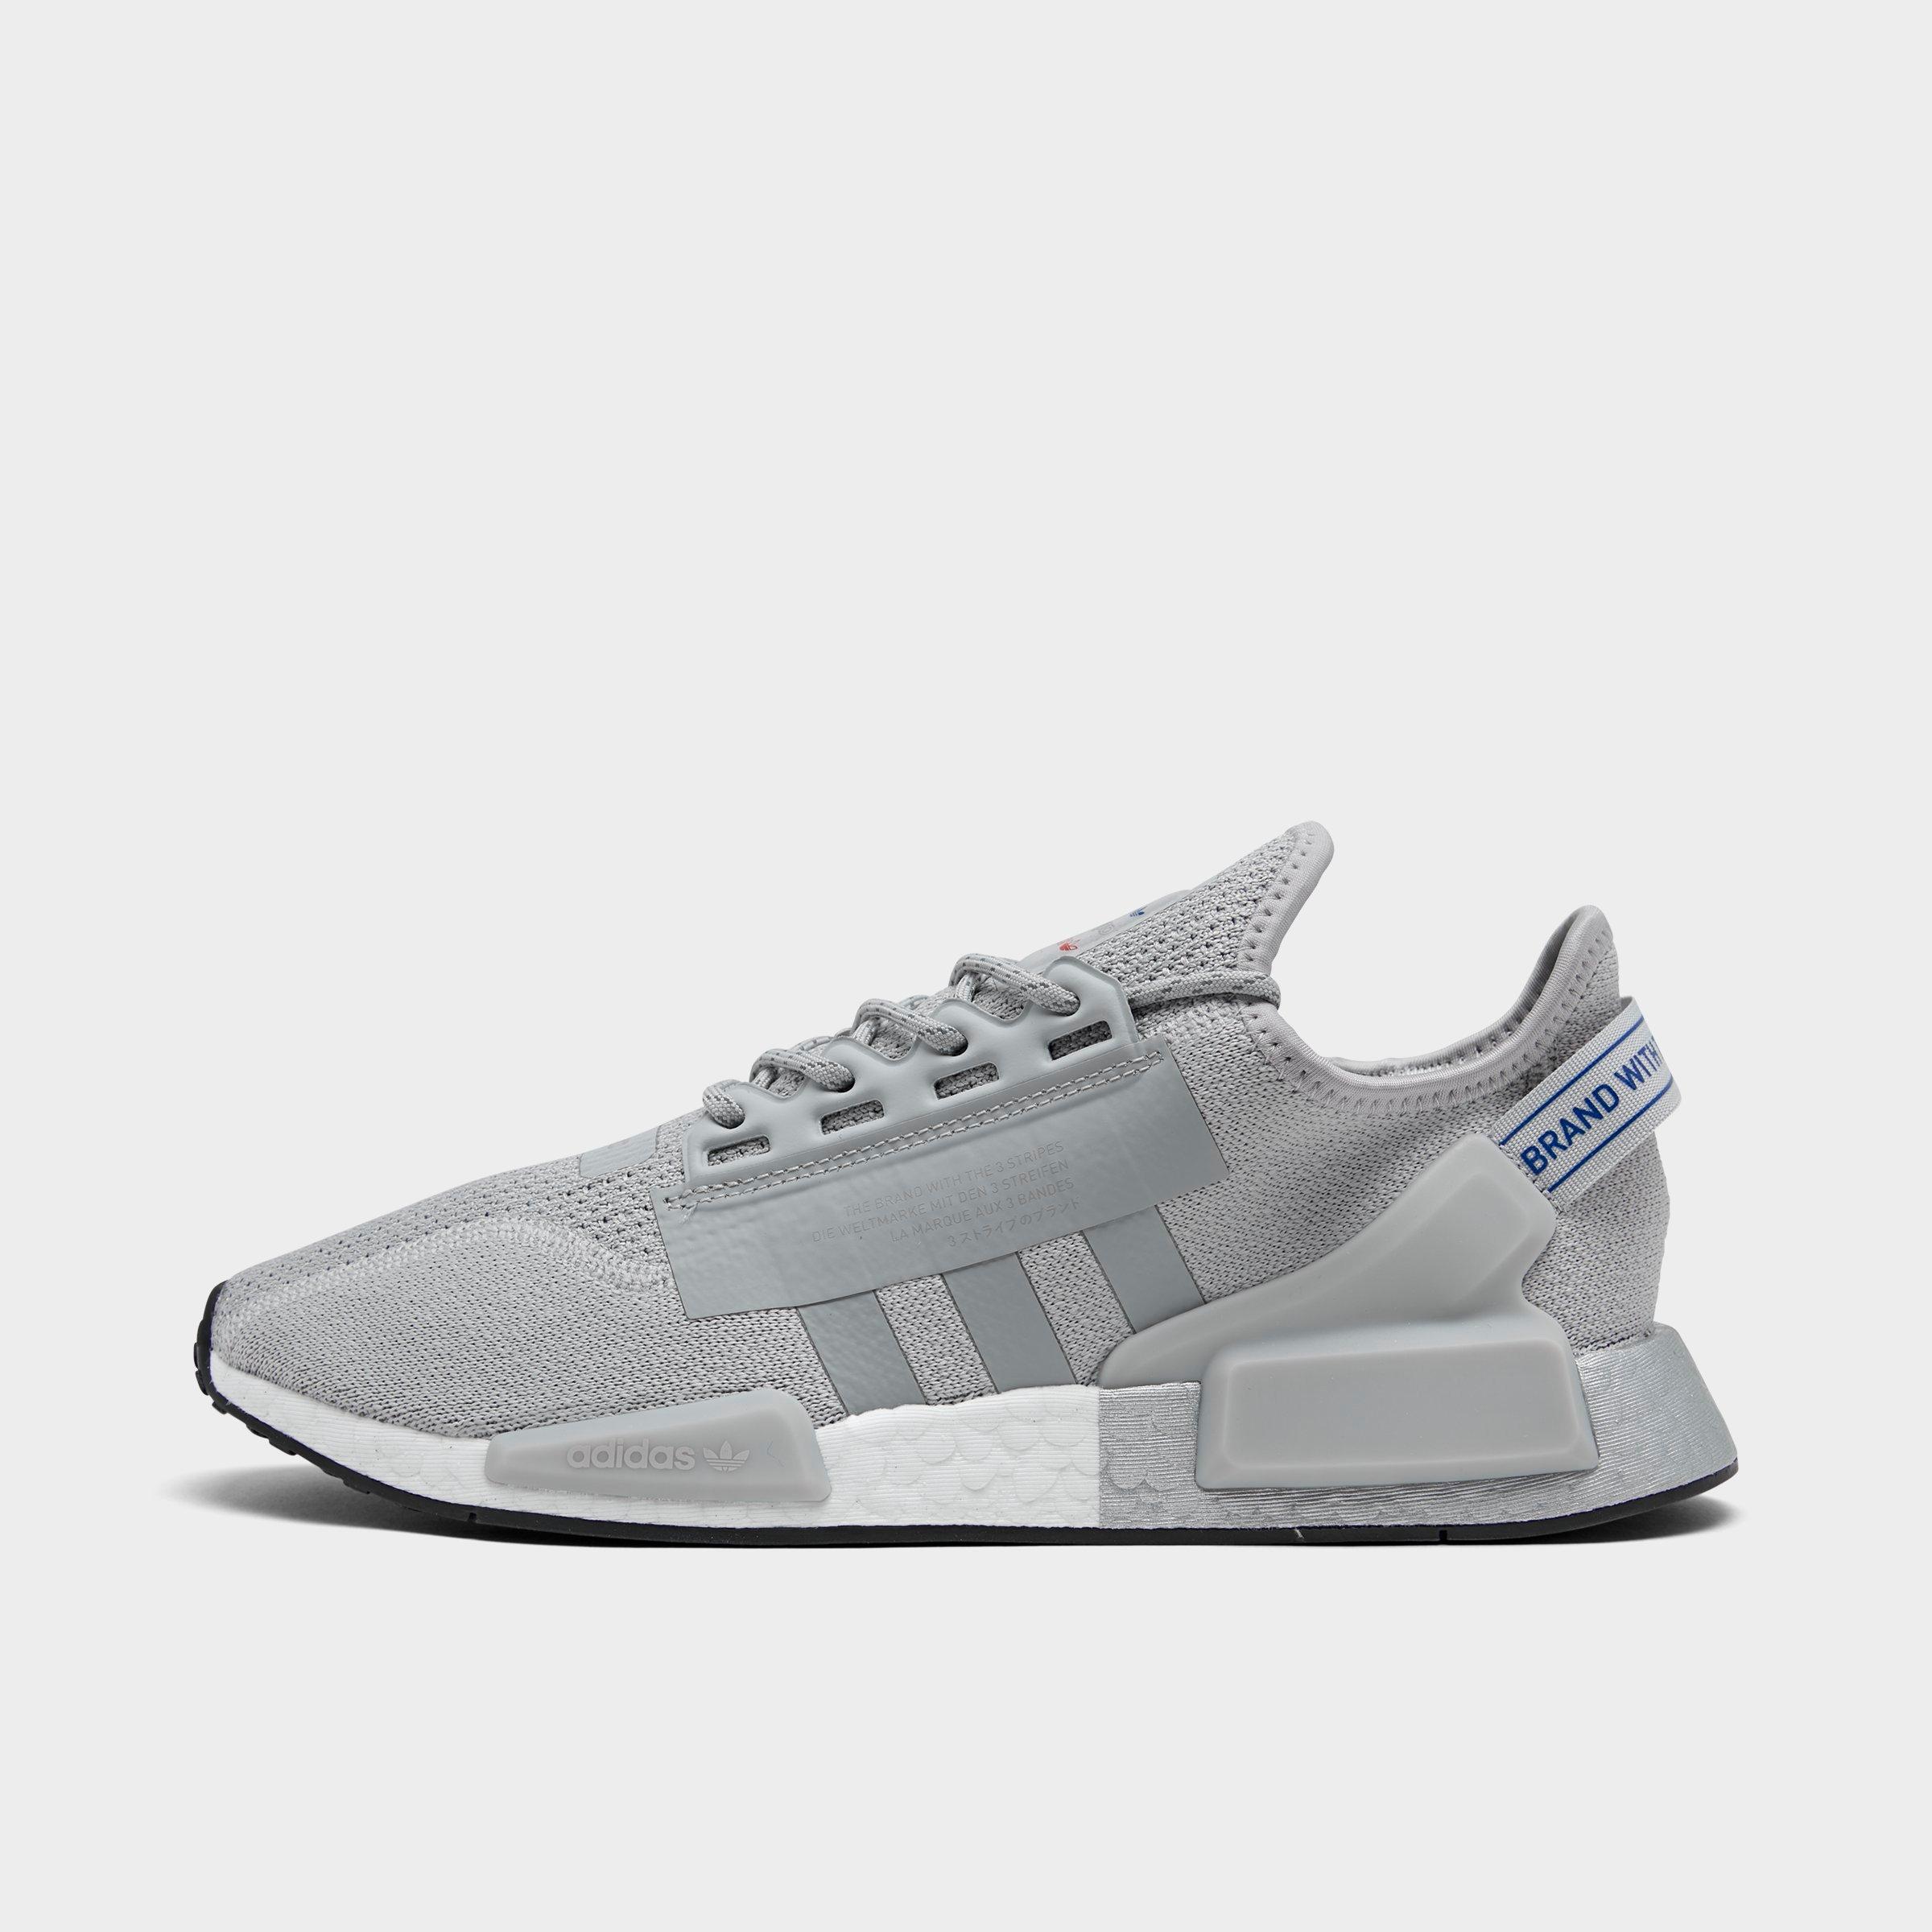 Now Available Womens adidas NMD R1 Glitch Gray